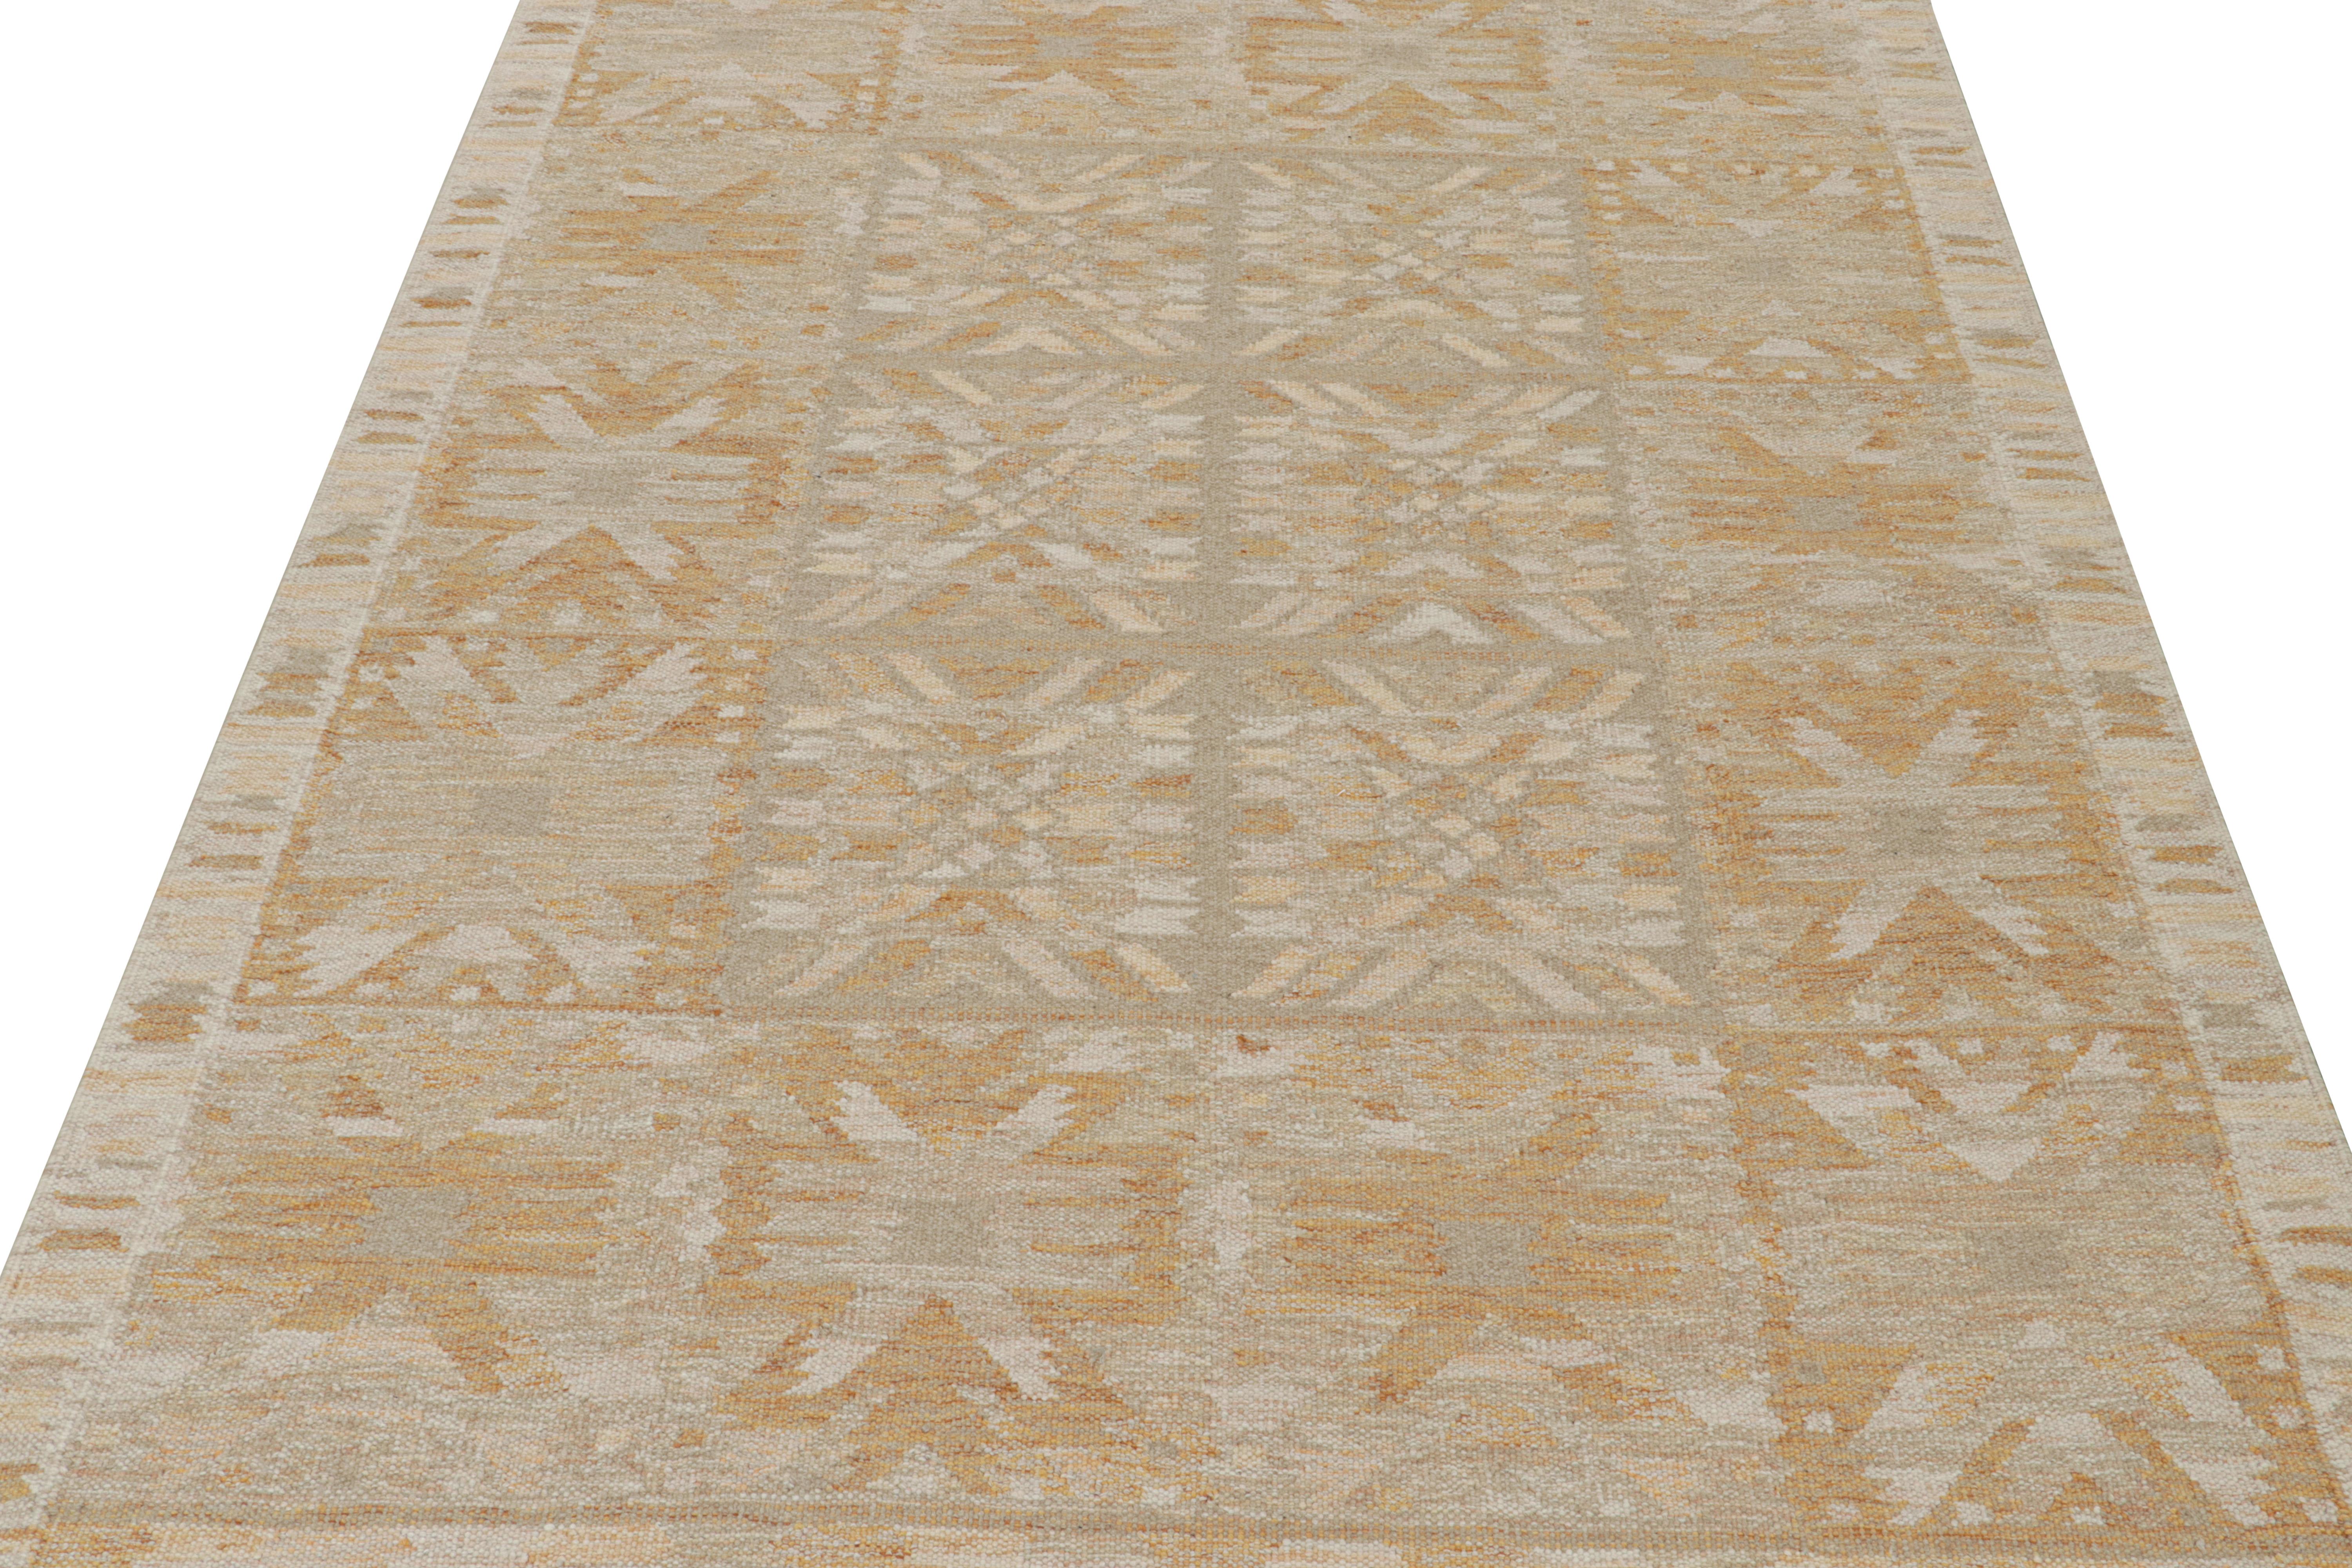 Rug & Kilim’s Scandinavian Style Kilim in Beige and Gold Geometric Patterns In New Condition For Sale In Long Island City, NY